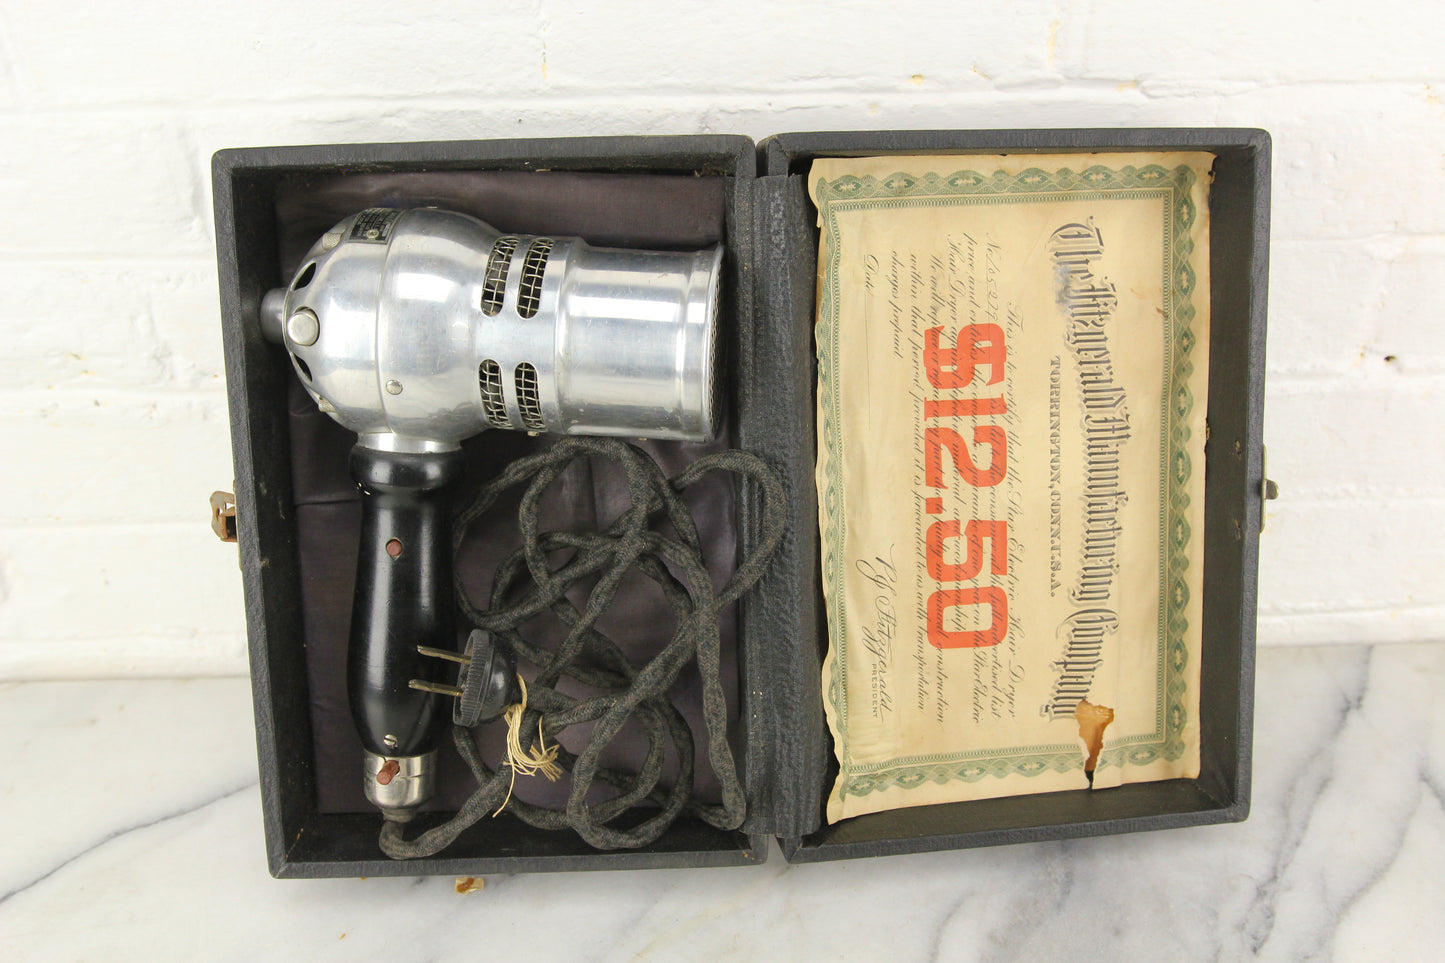 The Fitzgerald Manufacturing Company Star Electric Hair Dryer In Case